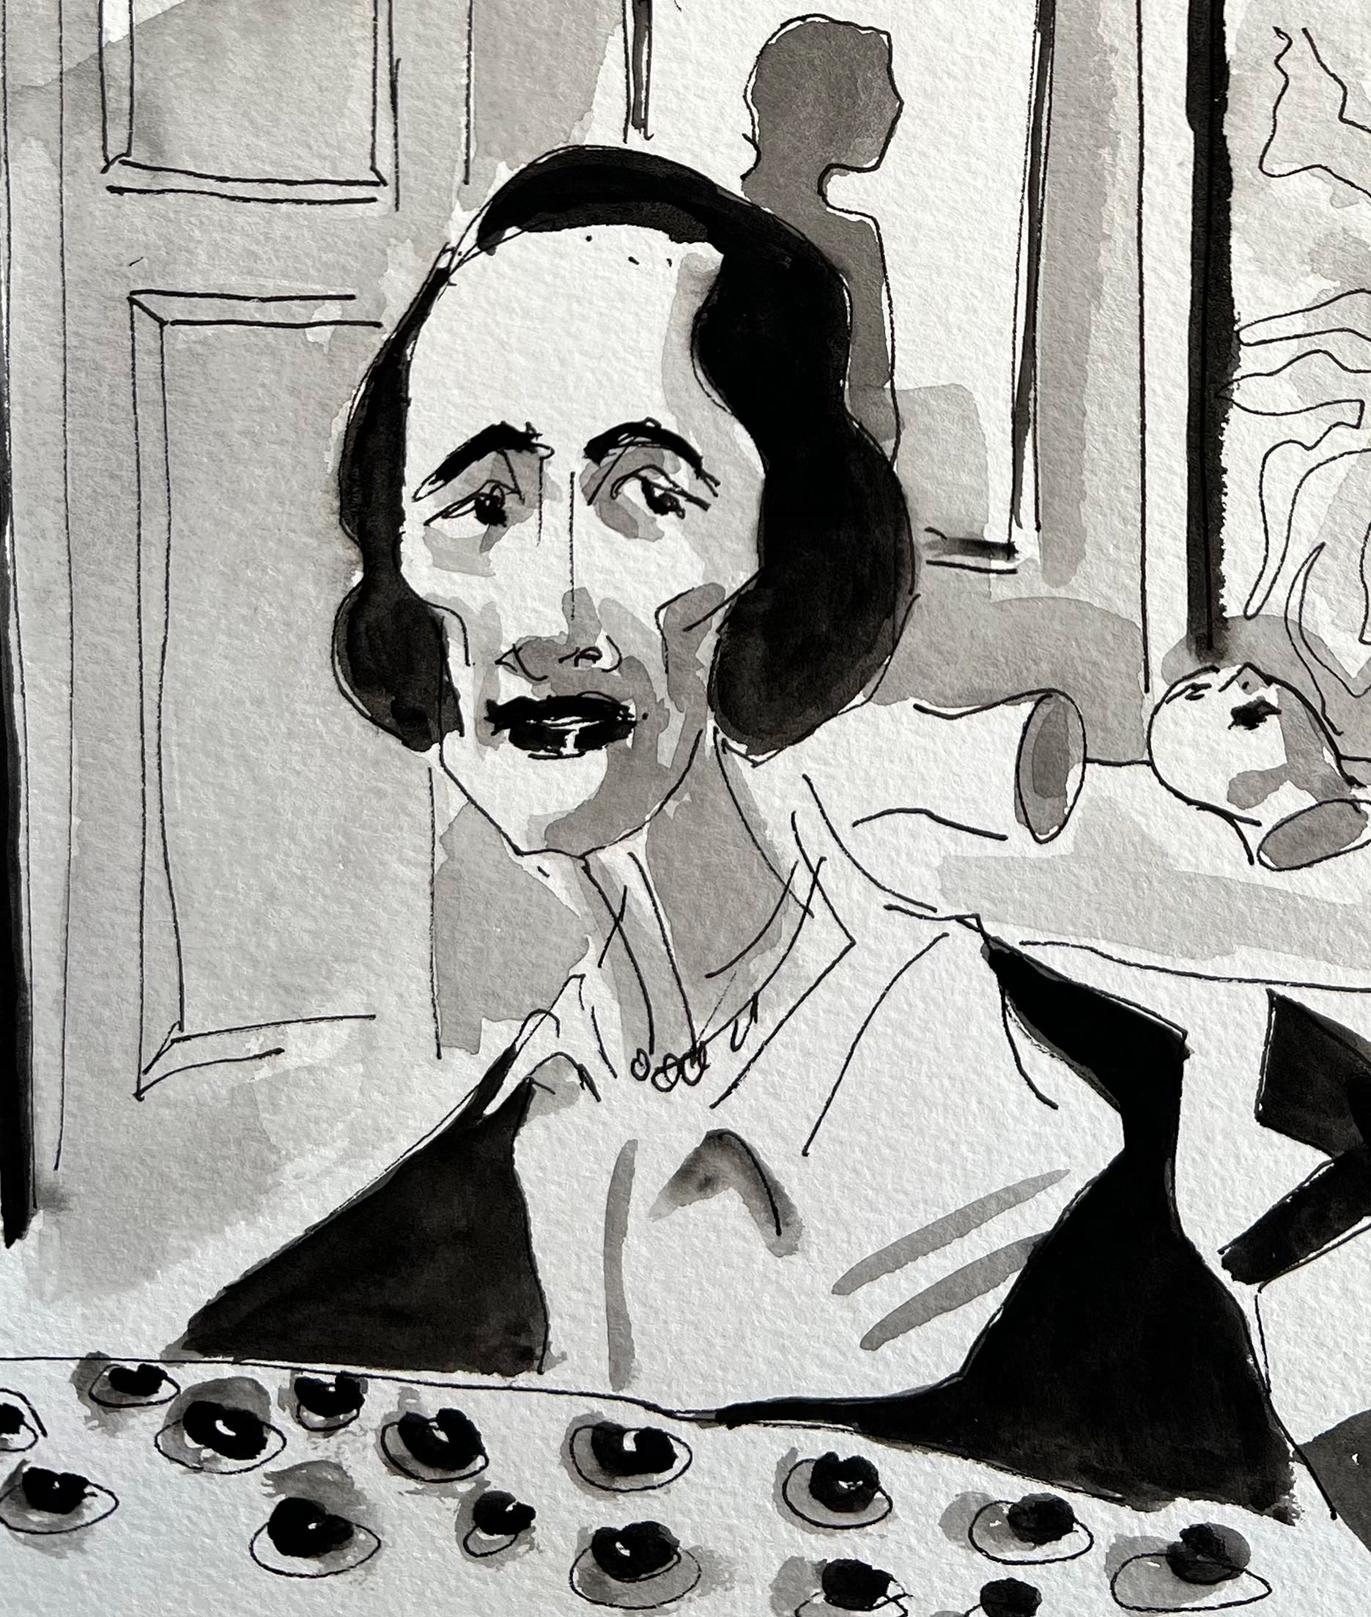 Diana Vreeland at home. Ink and gouache on paper - Art by Manuel Santelices